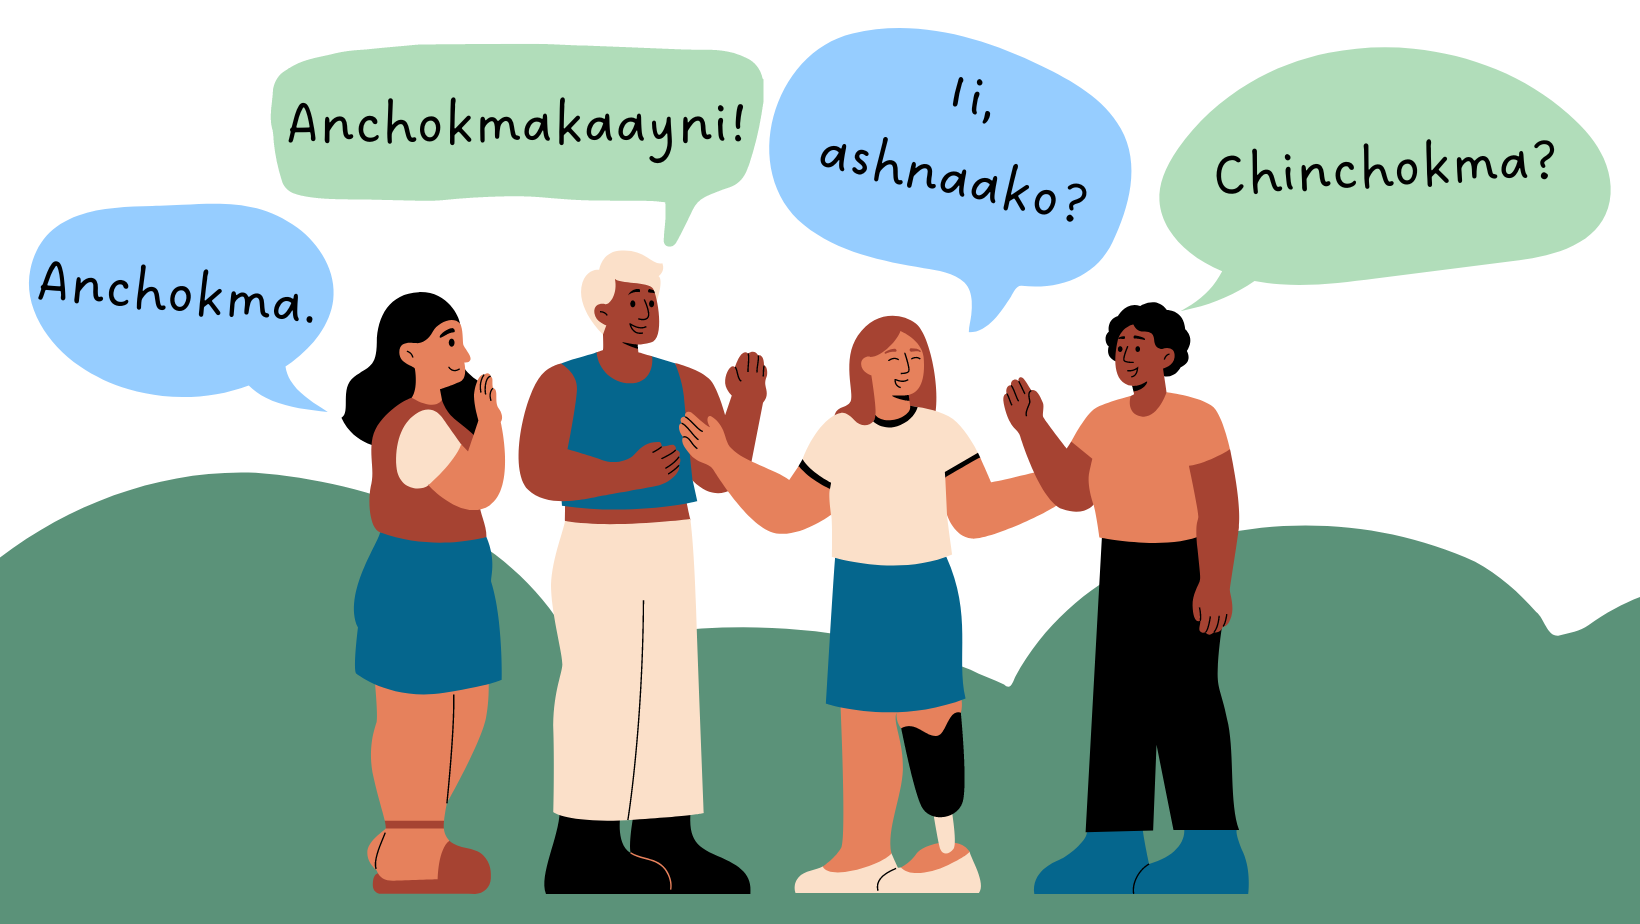 Design graphic of four people. Each person has a speech bubble. From right to left, the people are saying 'Chinchokma?' 'Ii, ashnaako?' 'Anchokmakaayni!' and 'Anchokma.'